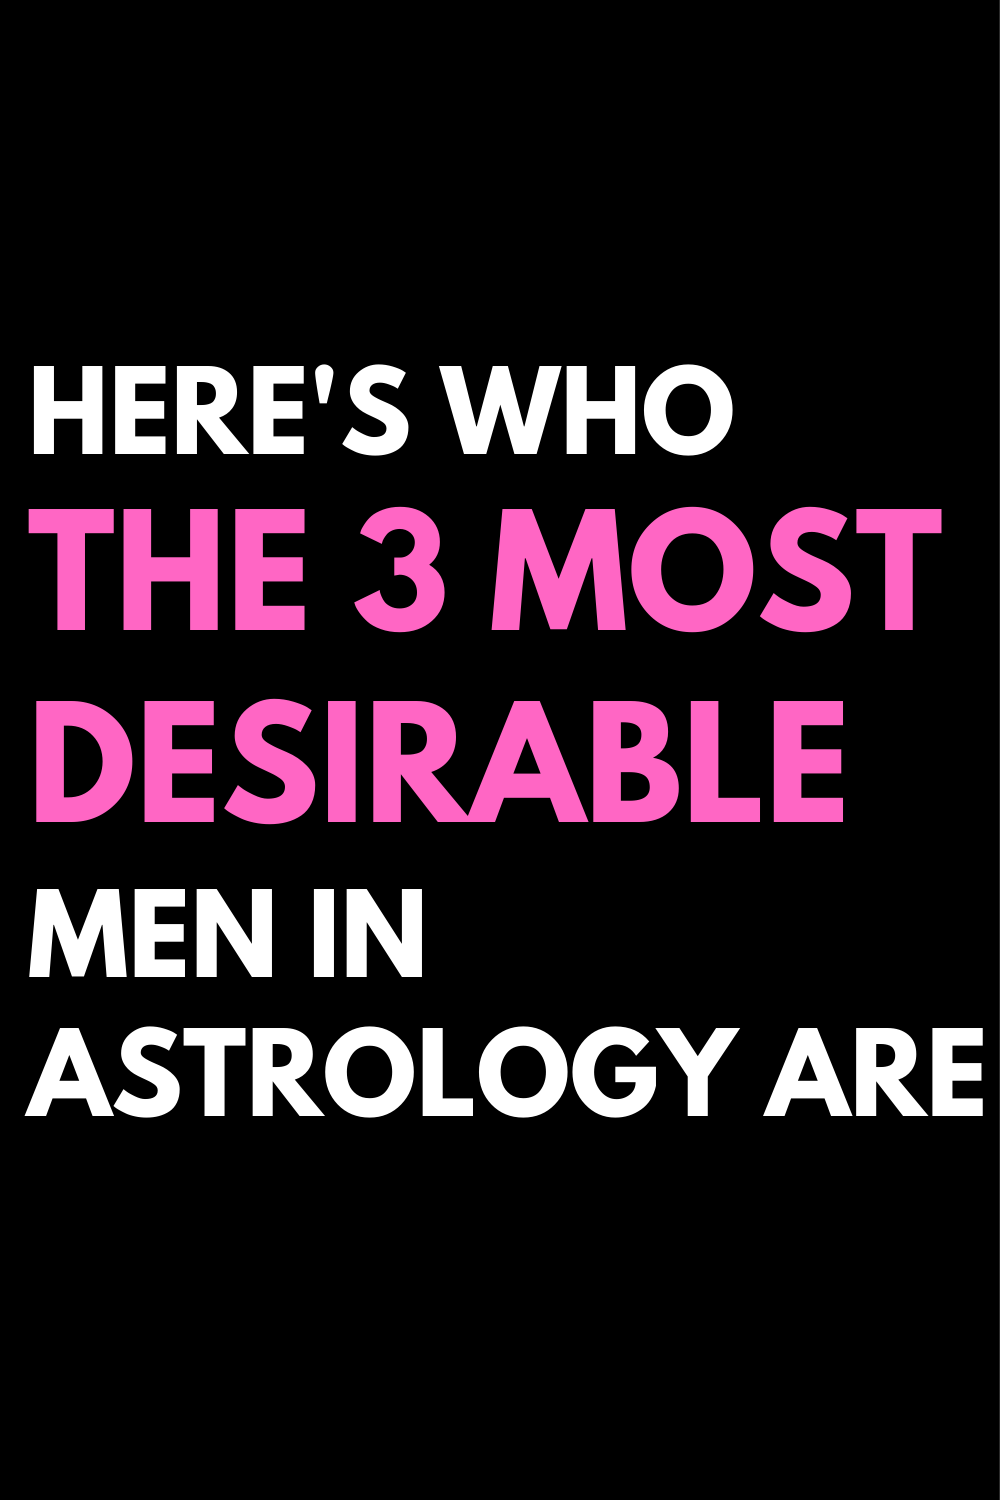 Here's Who The 3 Most Desirable Men In Astrology Are